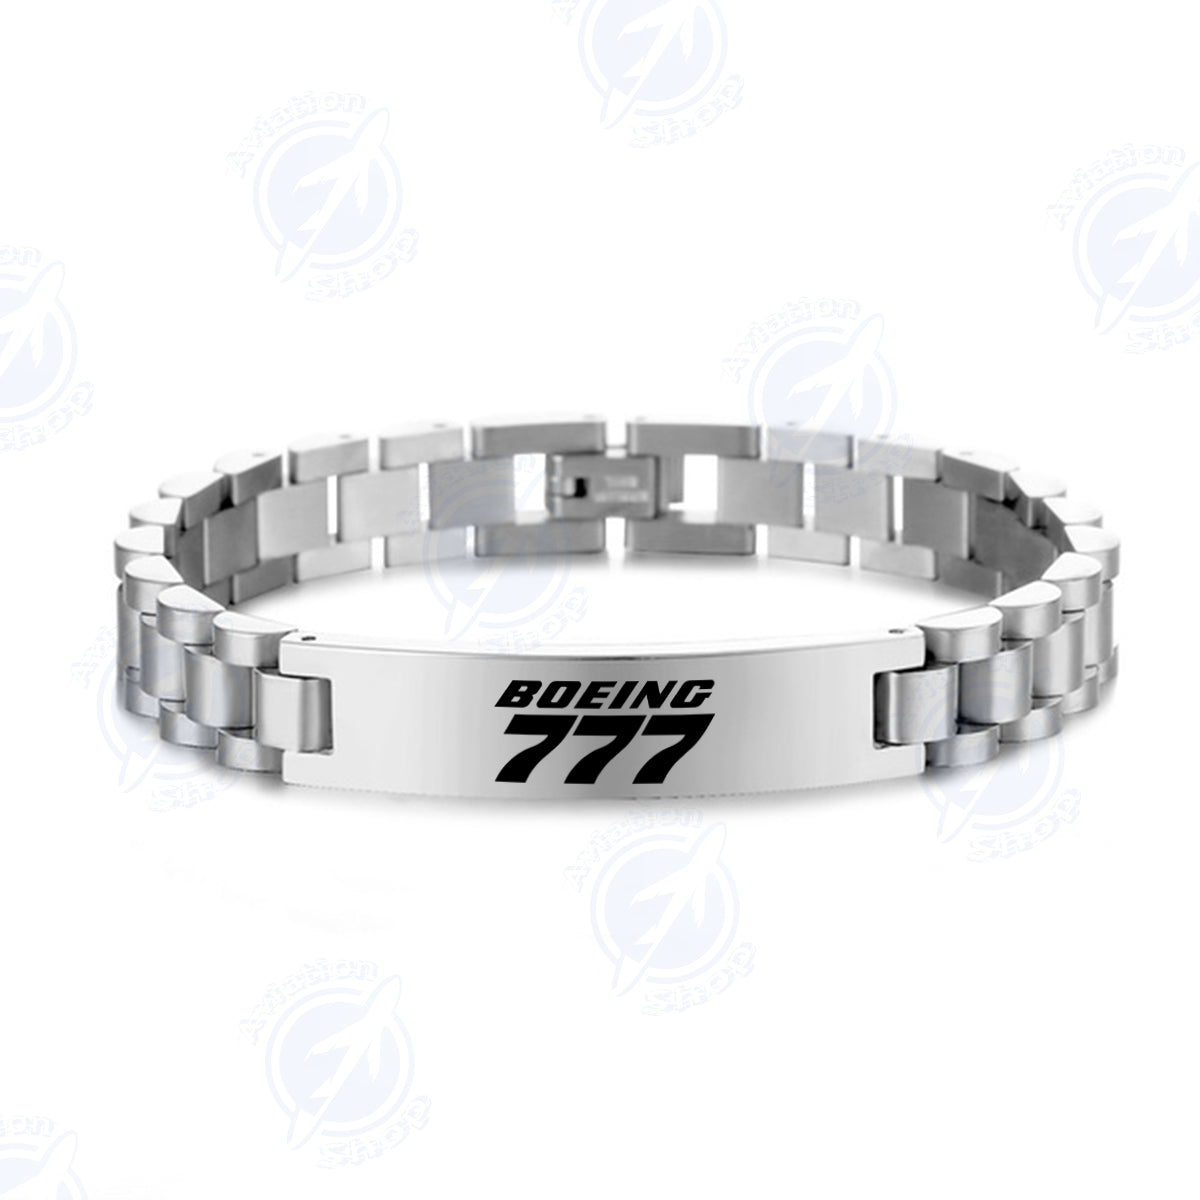 Boeing 777 & Text Designed Stainless Steel Chain Bracelets